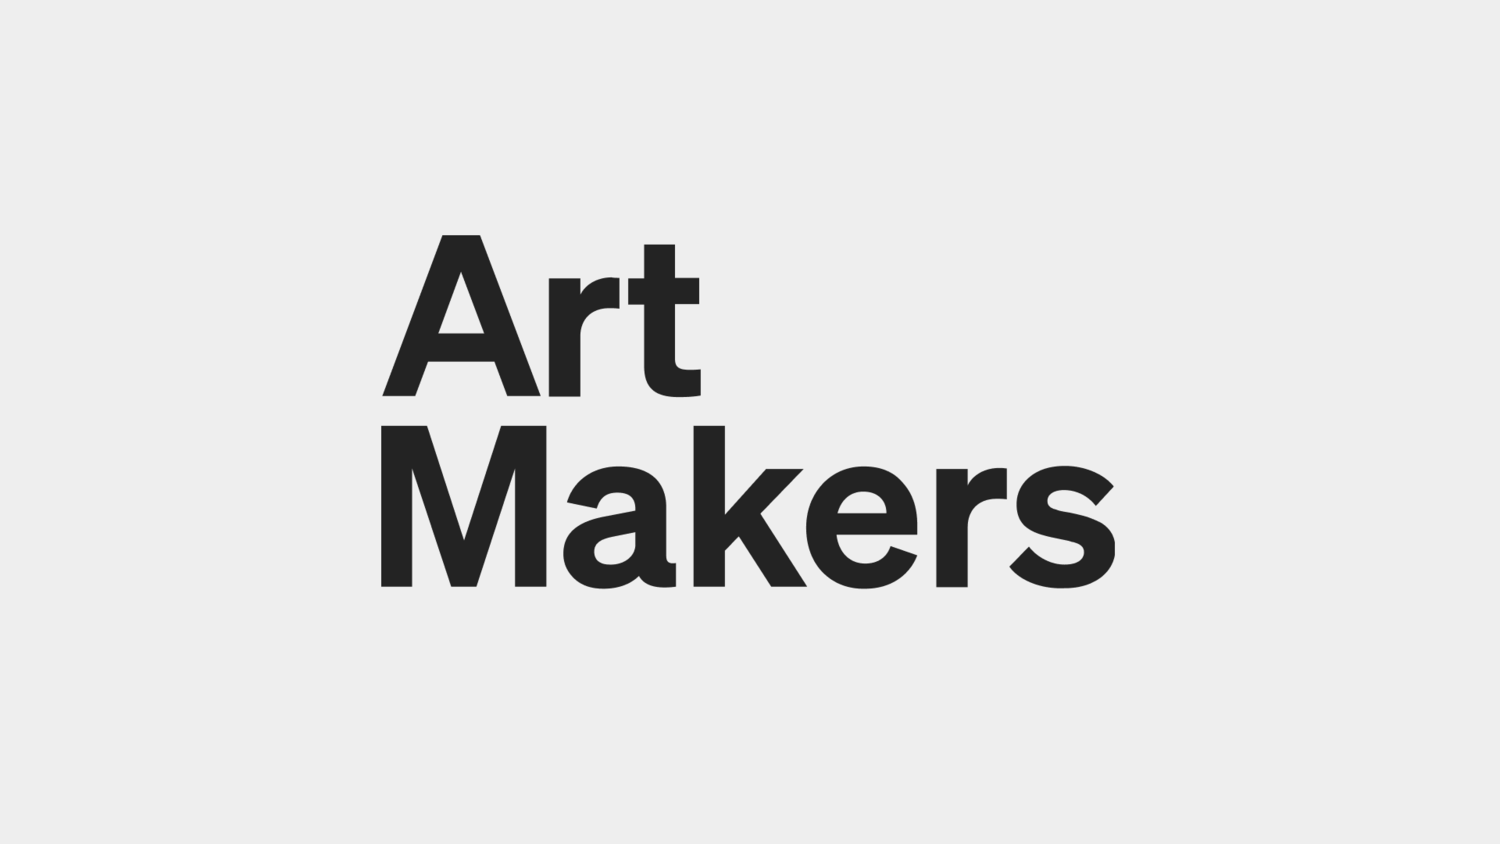 About — Art Makers